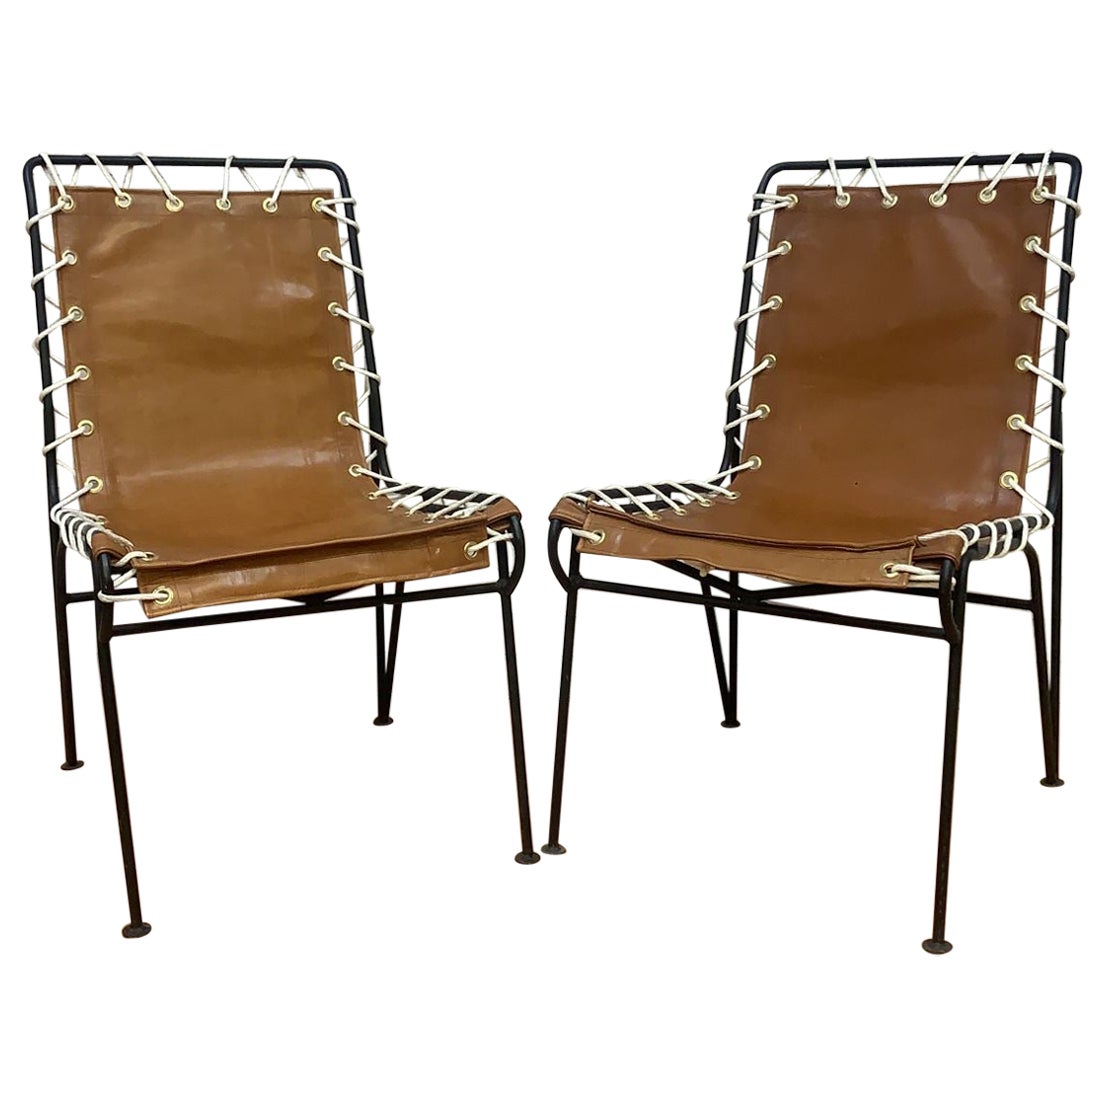 Pipsan for Ficks Reed Wrought Iron “Sol-Air” Lounge Chairs - Pair For Sale